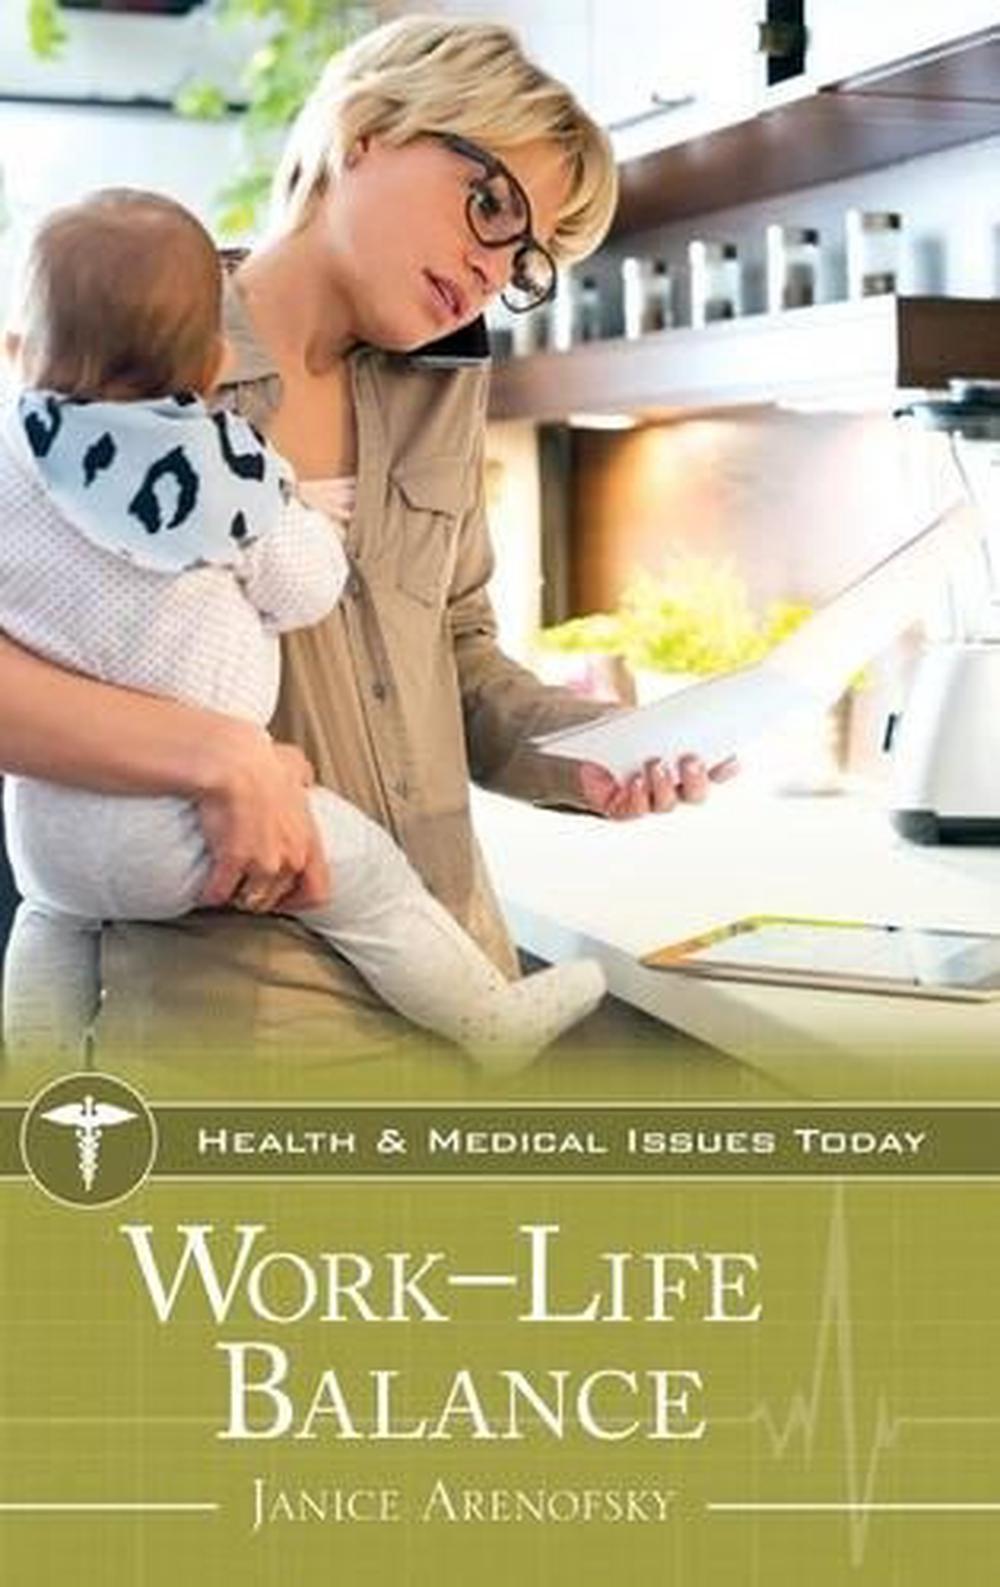 literature review on work life balance